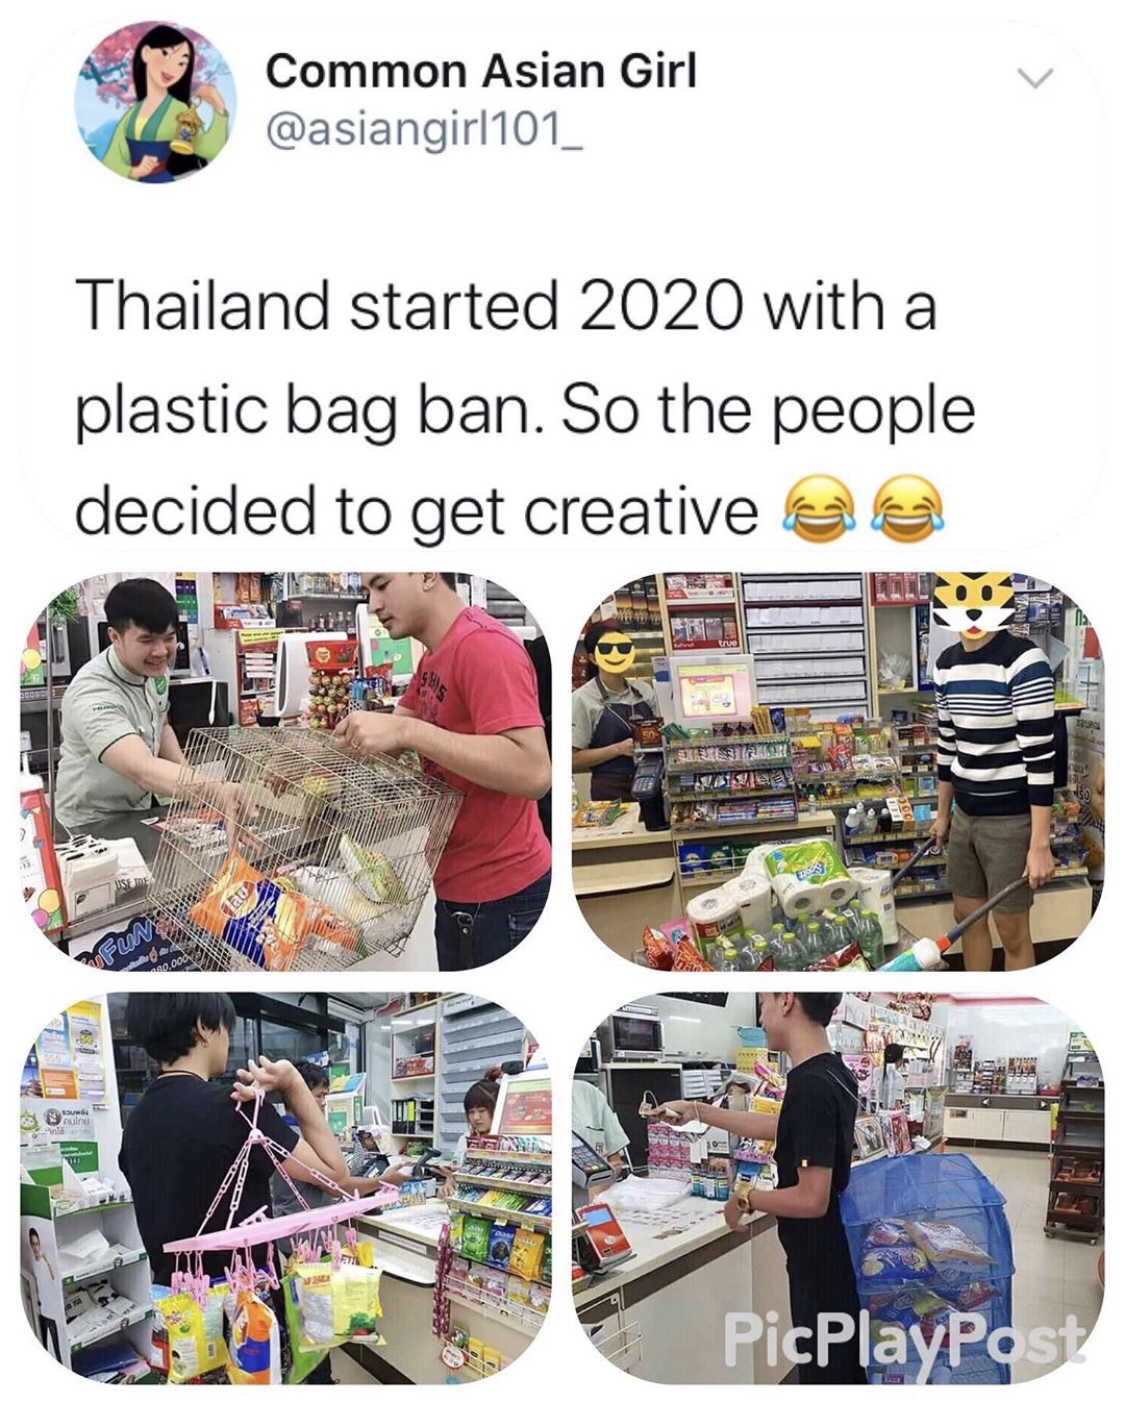 disney - Common Asian Girl Thailand started 2020 with a plastic bag ban. So the people decided to get creative PicPlaypas